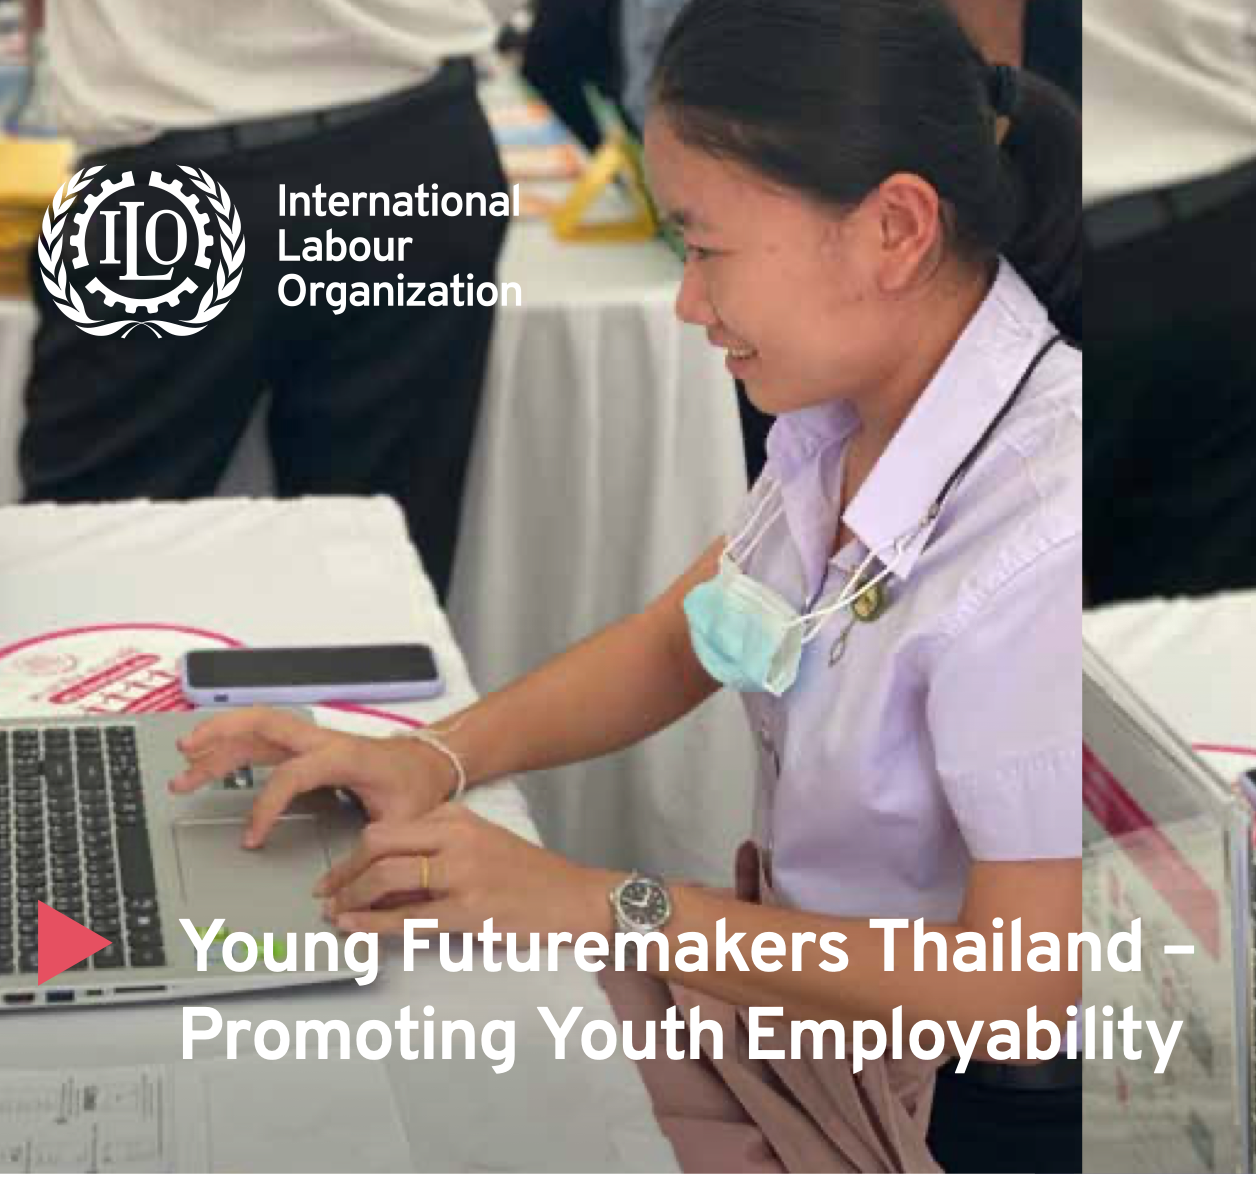 Fact sheet of the Young Futuremakers Thailand – Promoting Youth Employability